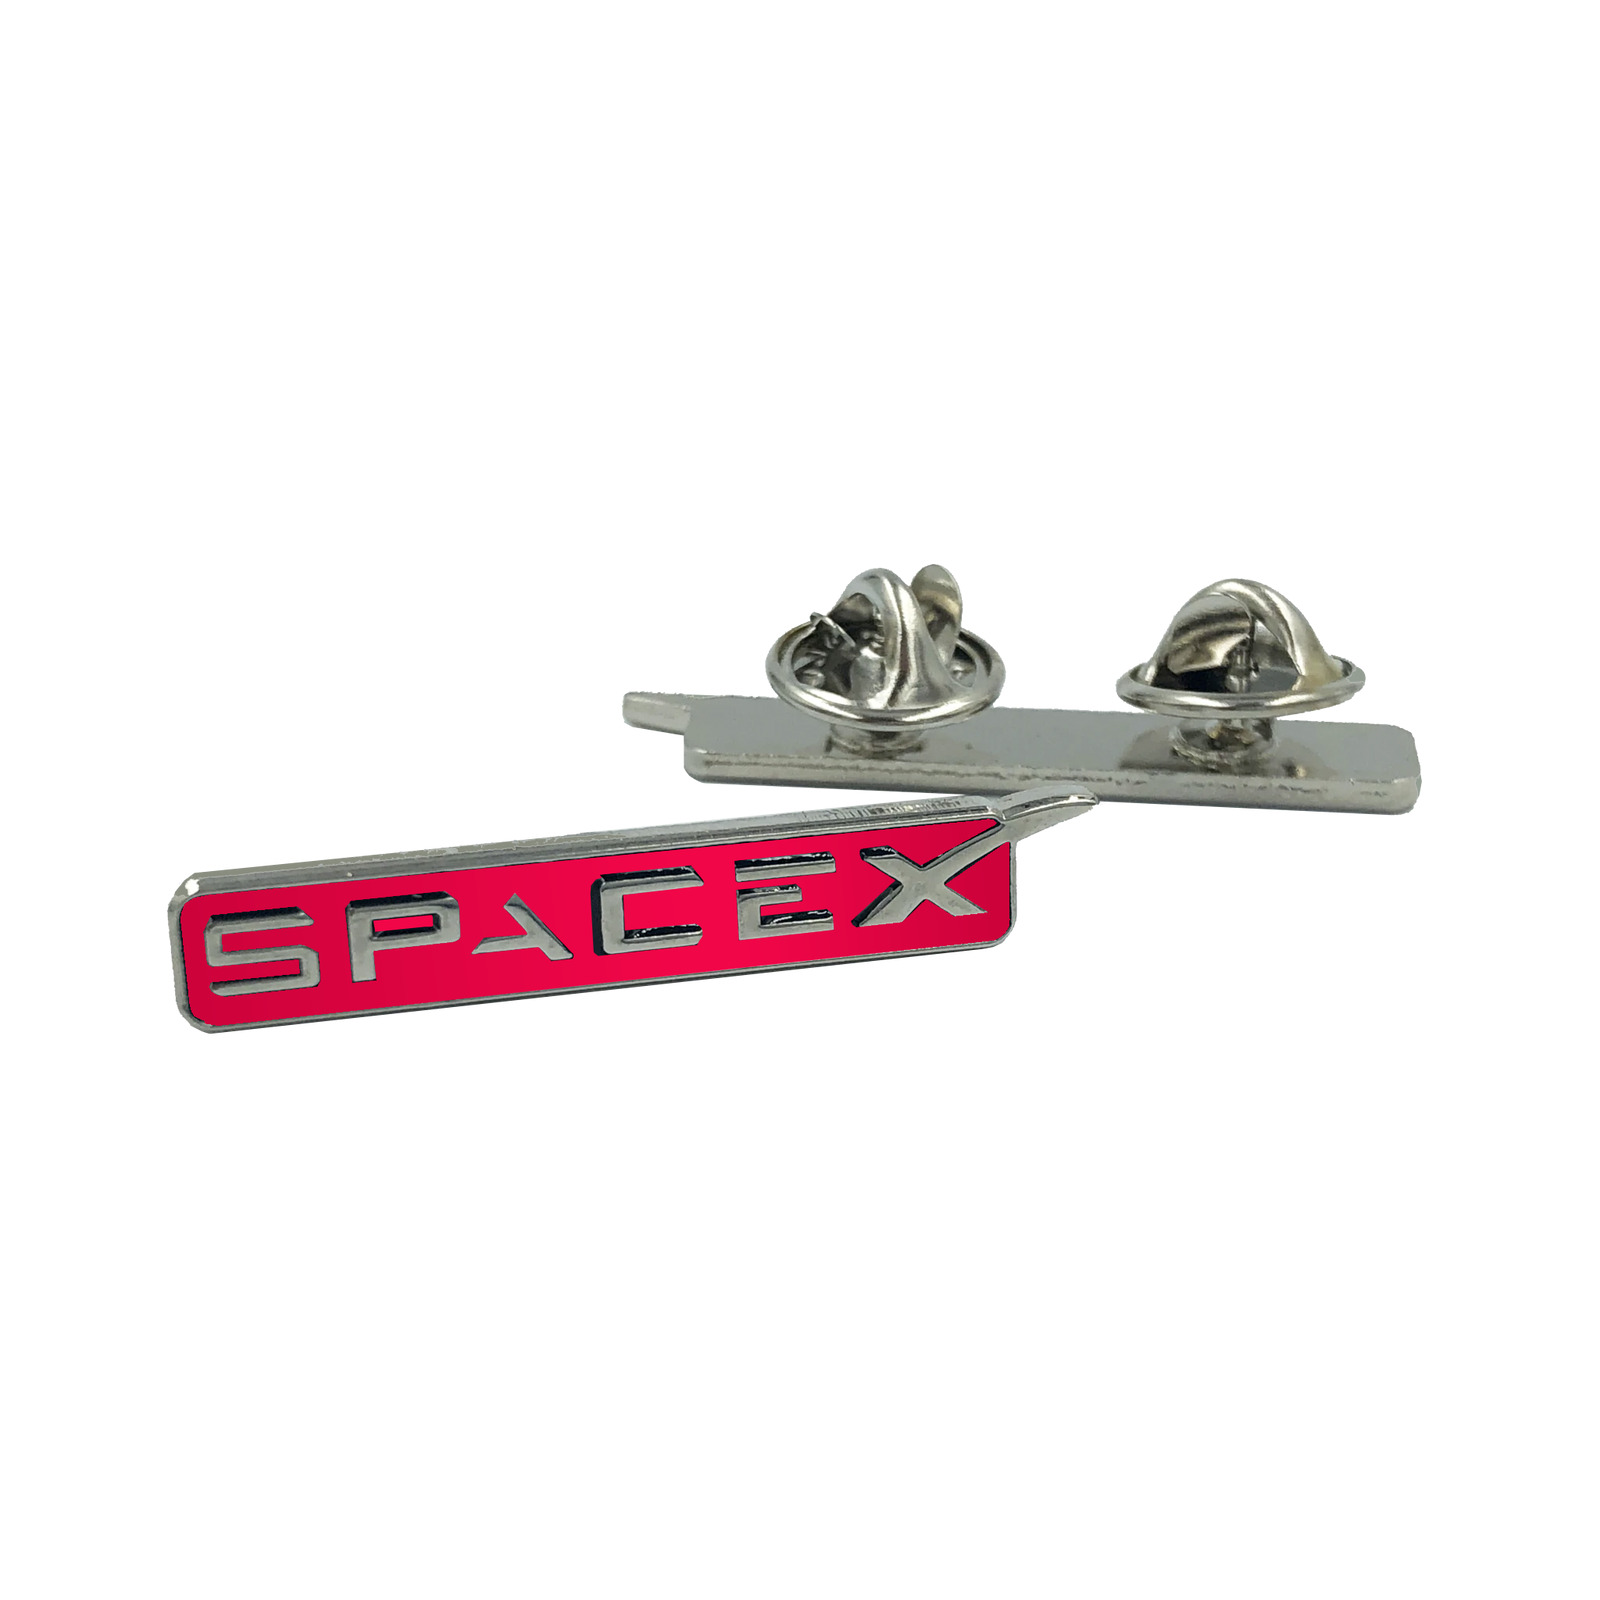 SpaceX pin Space X dual pin back red lapel pin EL2-013 P-086A